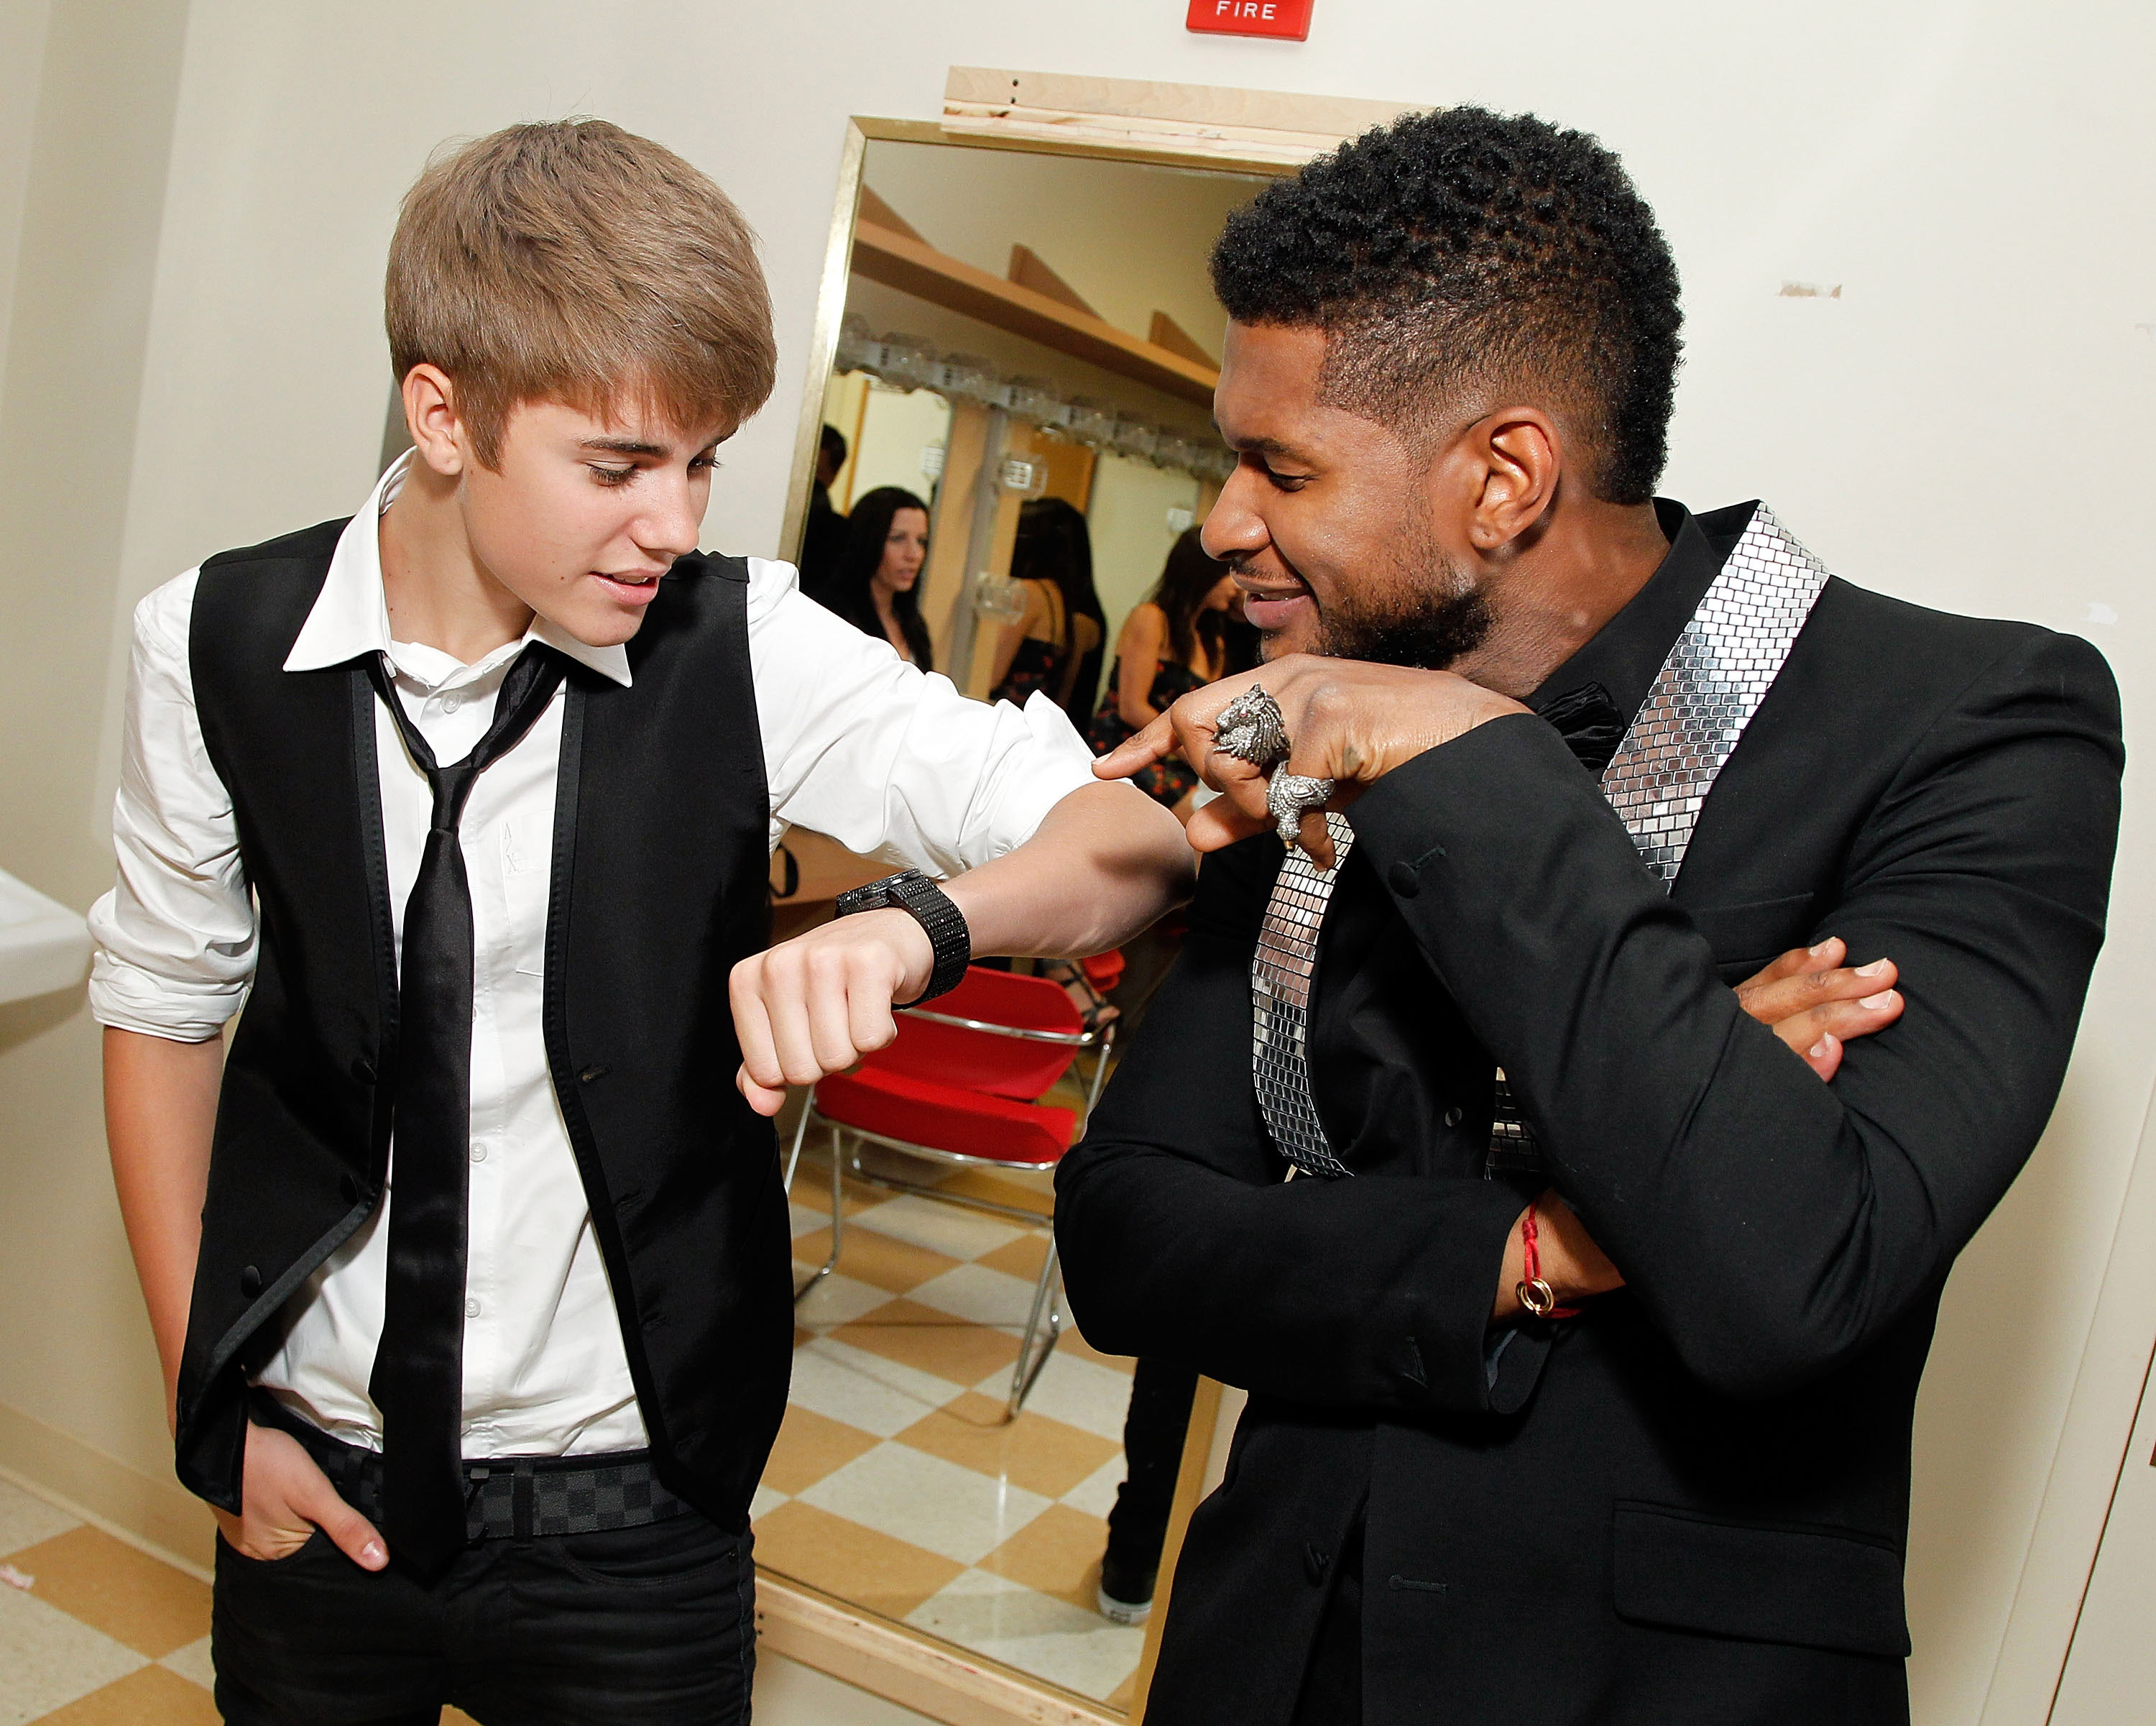 (EXCLUSIVE, Premium Rates Apply) (EXCLUSIVE COVERAGE) Musician and 2011 Horizon Award recipient Justin Bieber poses with musician Usher Raymond backstage at the 33rd Annual Georgia Music Hall Of Fame Awards at the Cobb Energy Performing Arts Center on September 17, 2011 in Atlanta, Georgia.